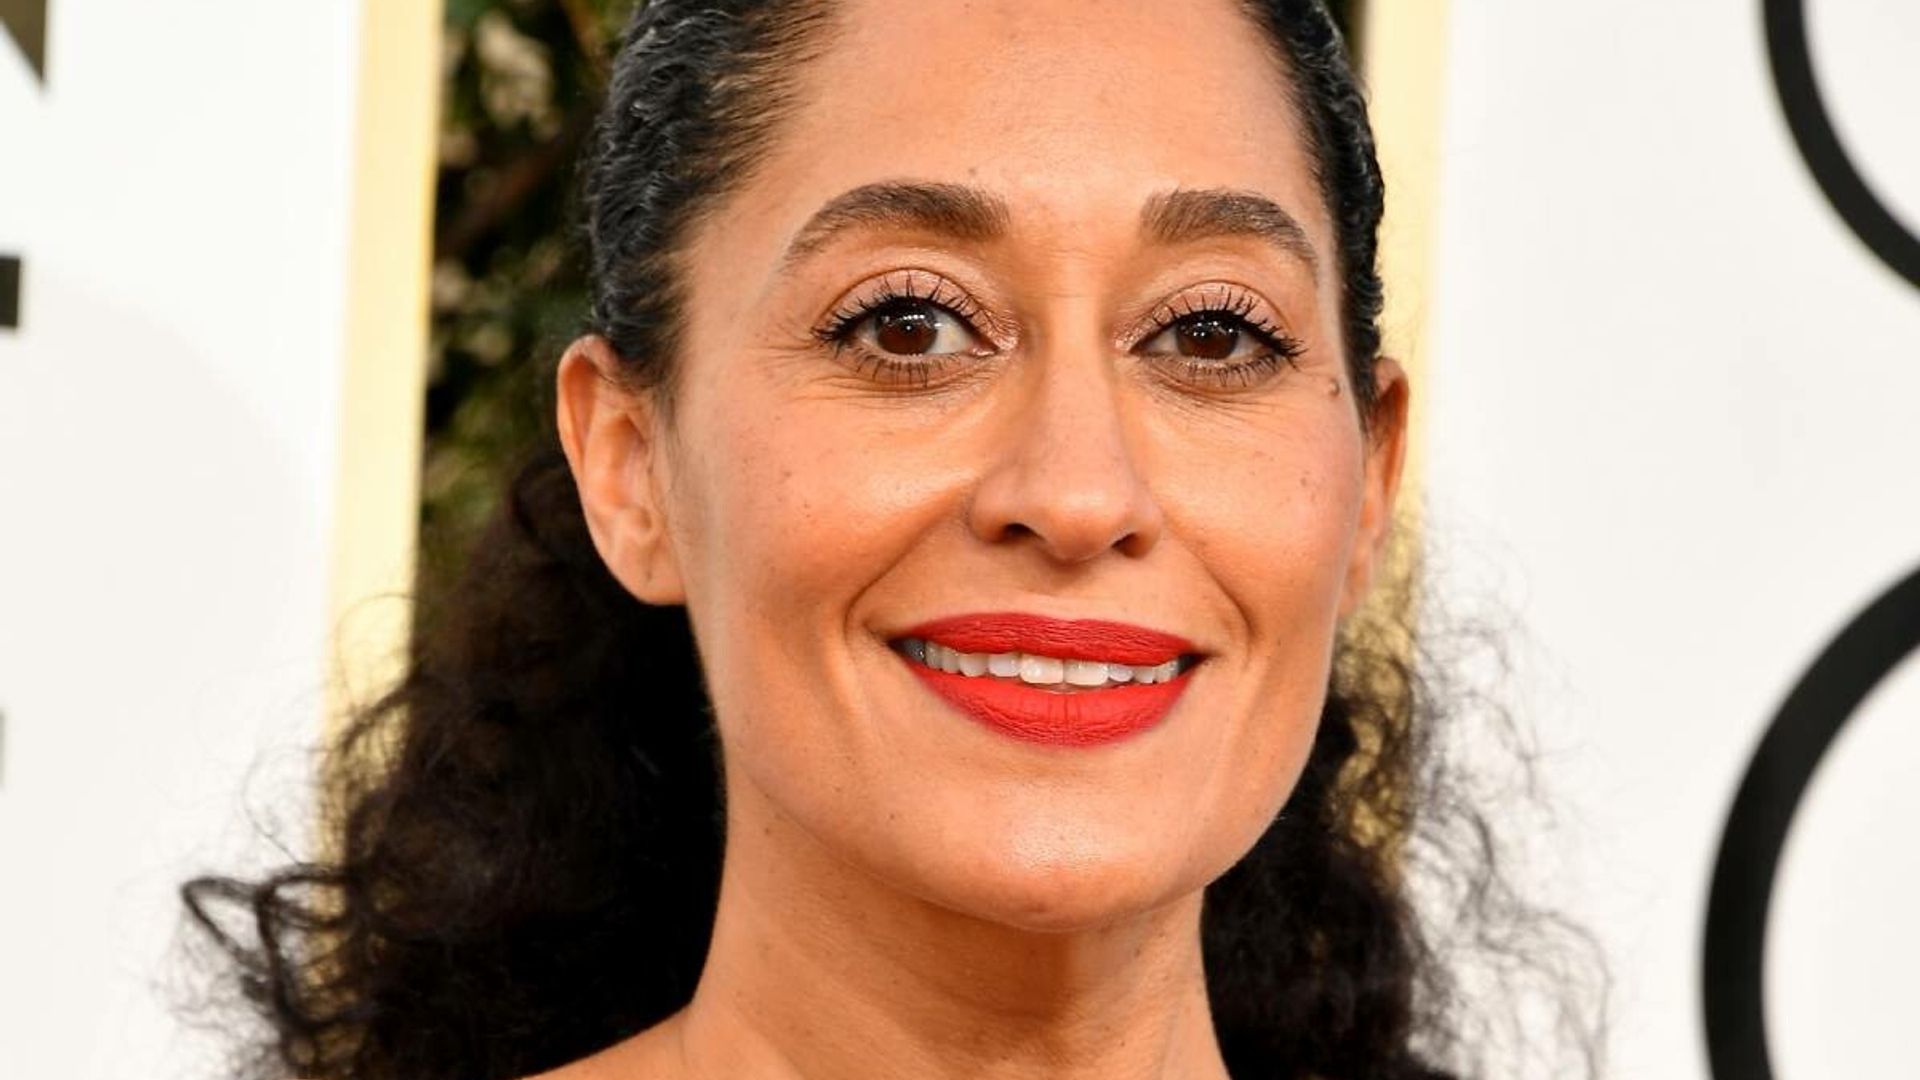 Tracee Ellis Ross stuns in surprising power suit to host 2022 Oscar nominations